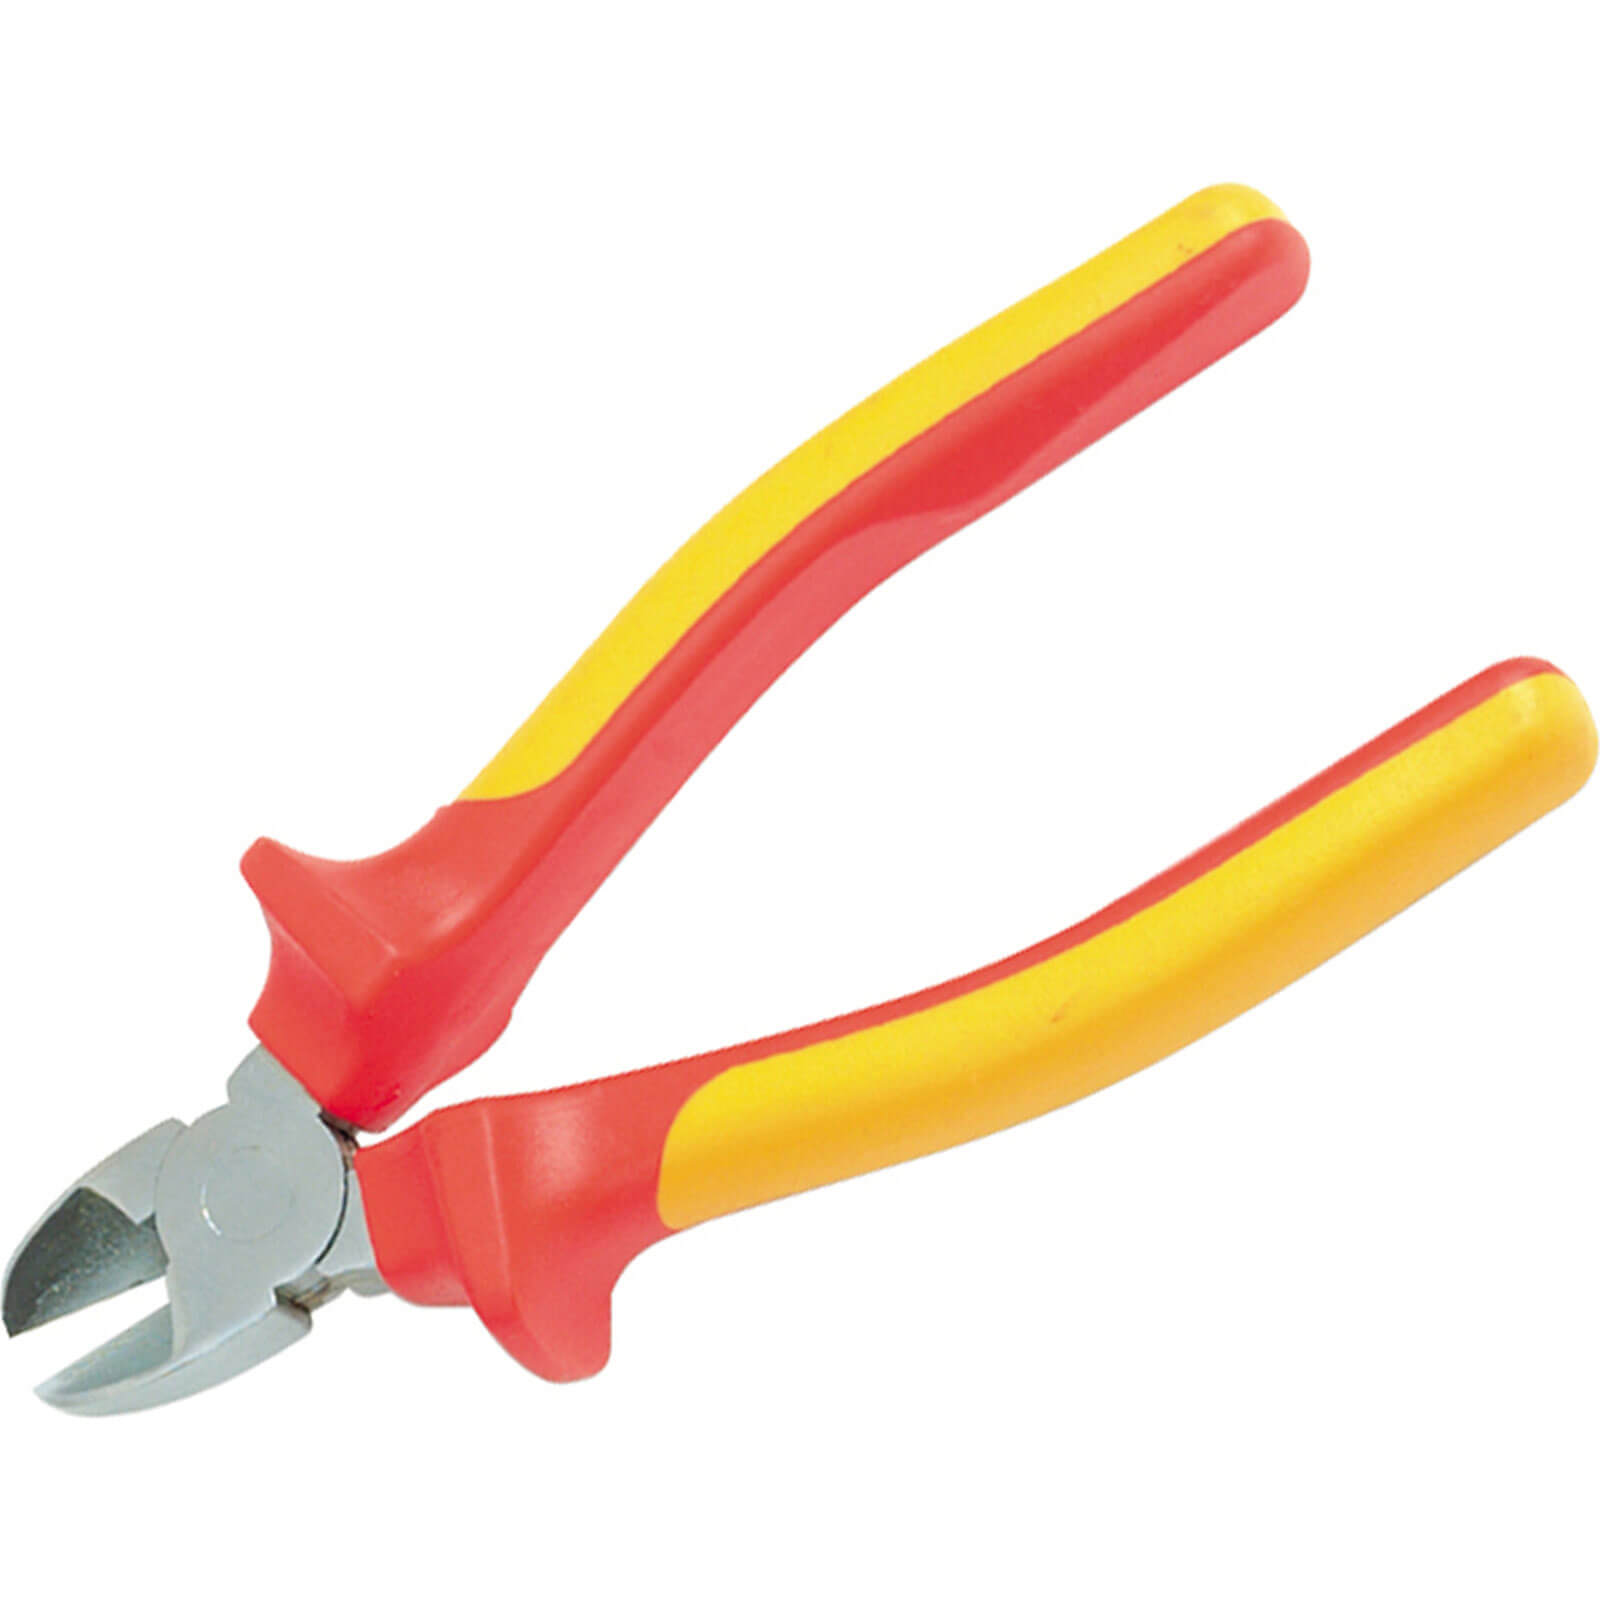 Image of Stanley Insulated Side Cutters 160mm